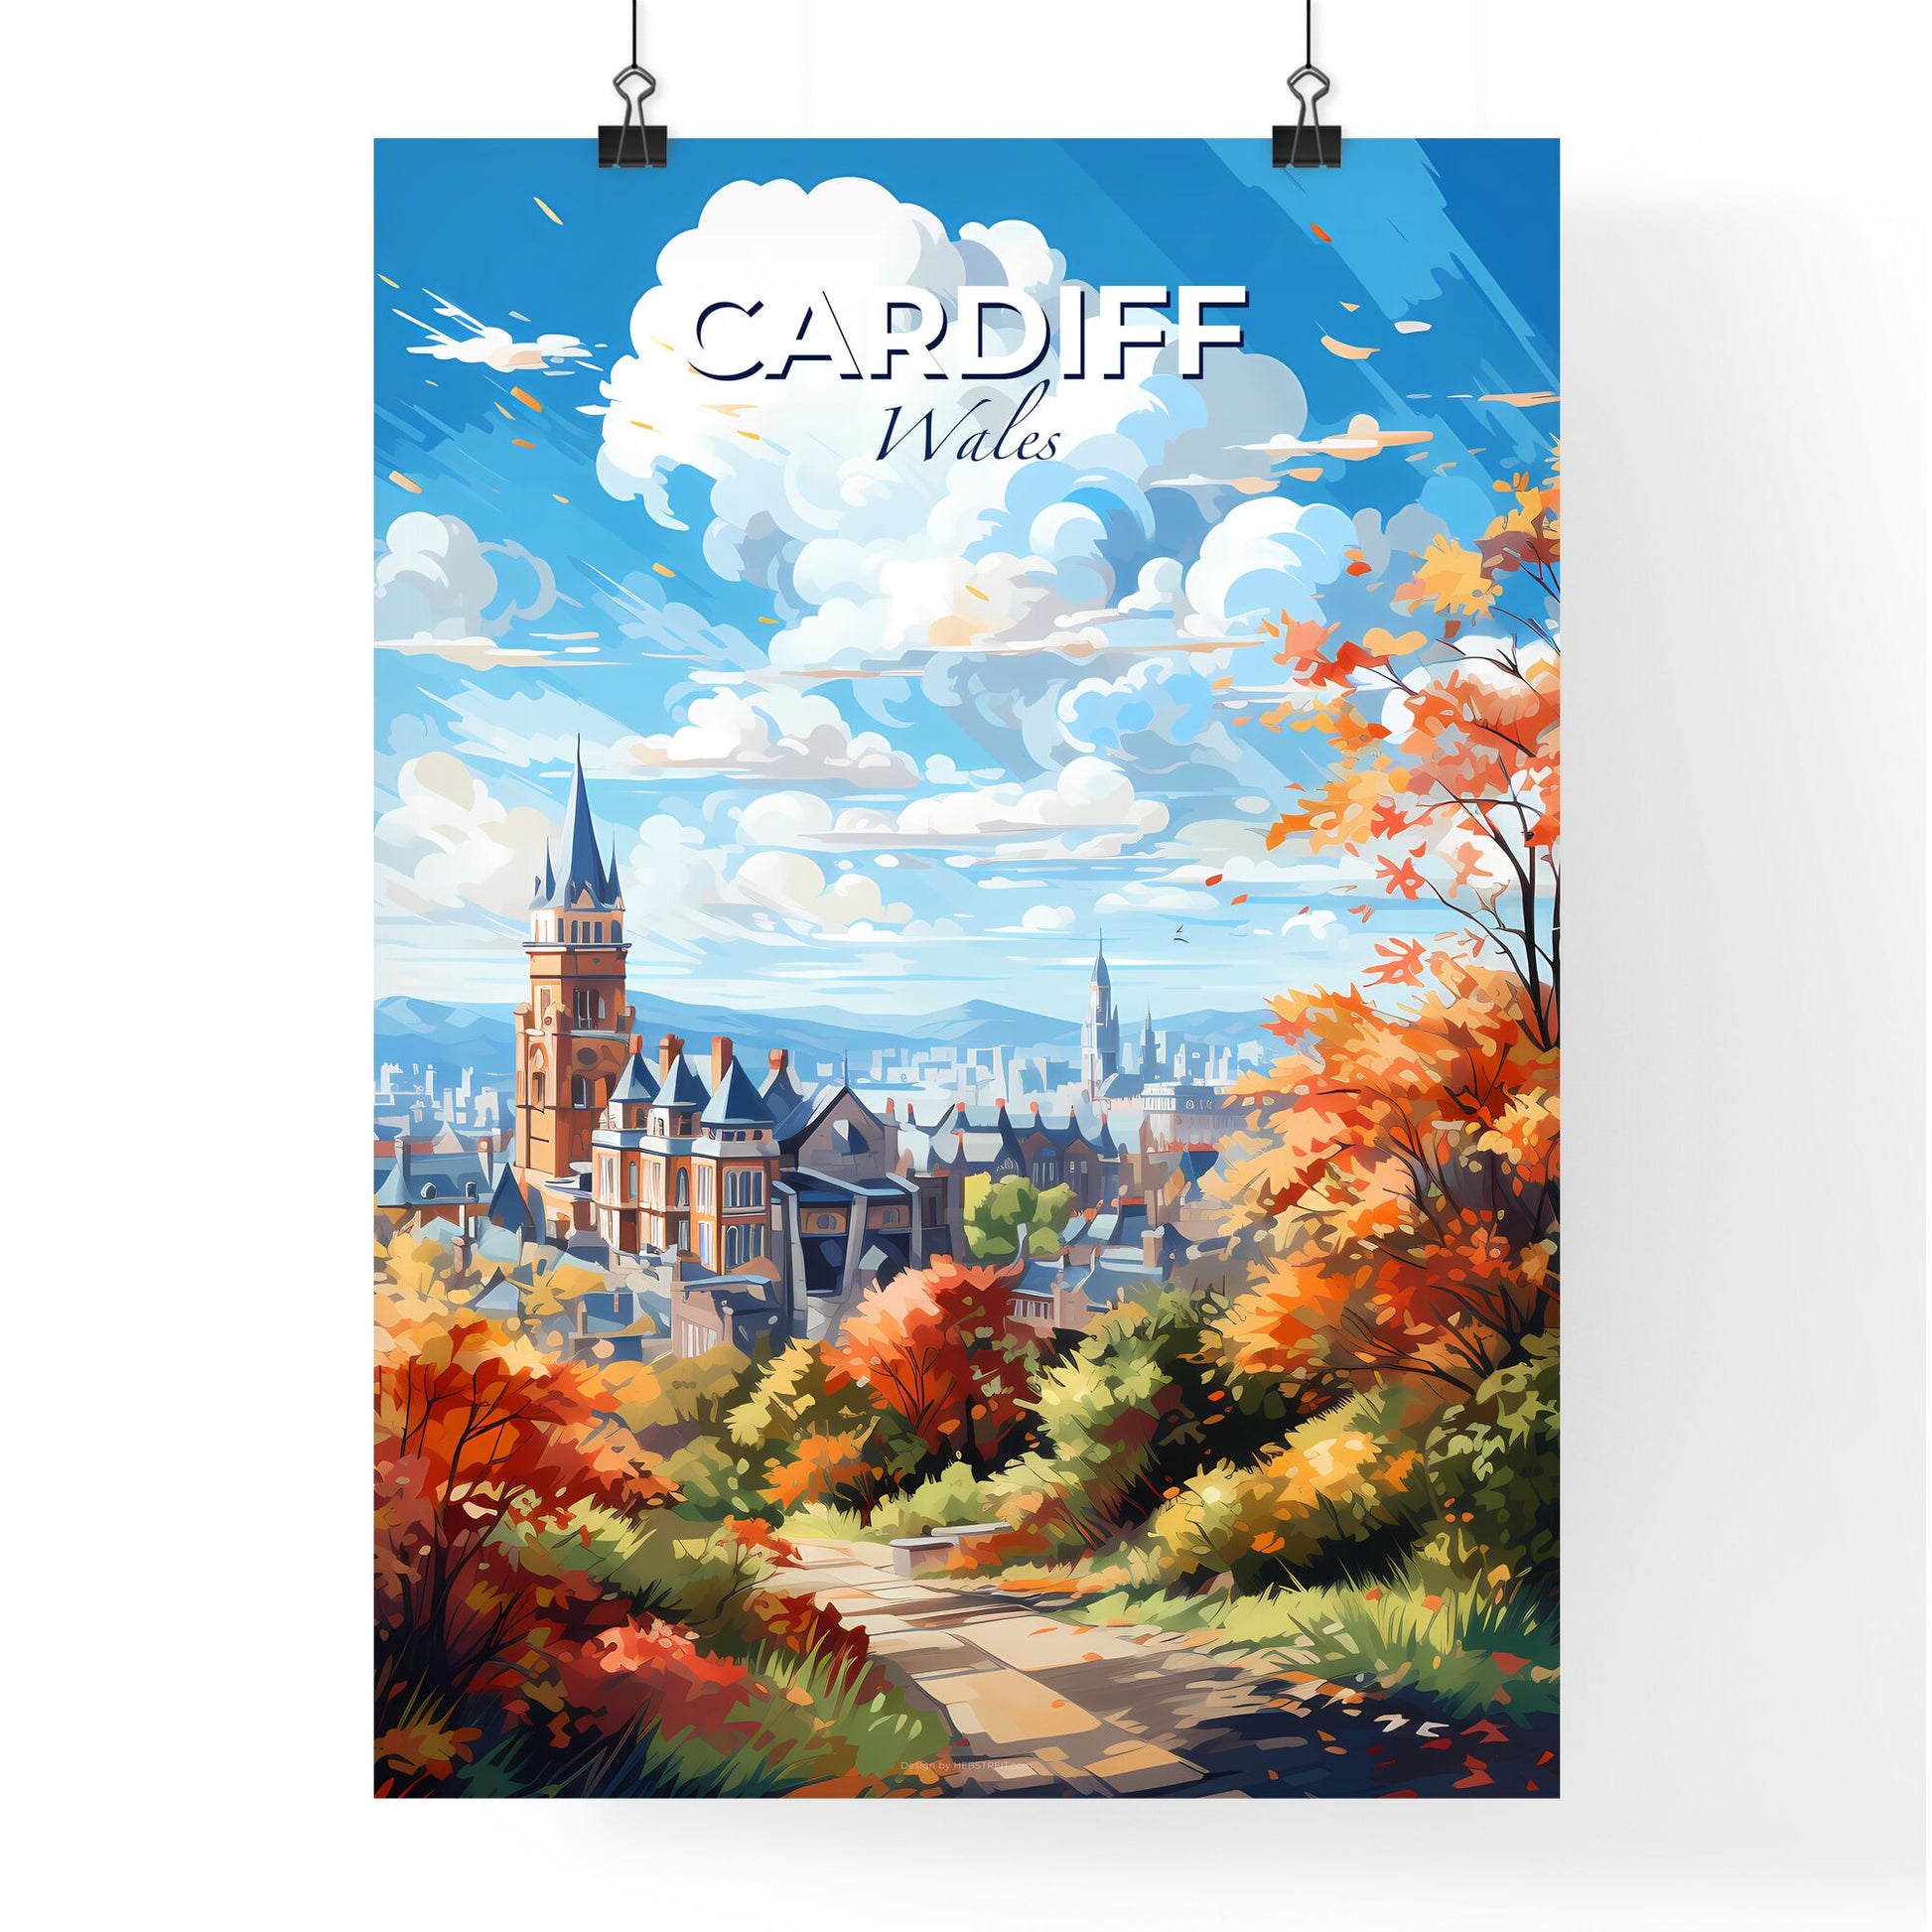 Cardiff Wales Skyline - A Painting Of A City With Trees And Blue Sky - Customizable Travel Gift Default Title